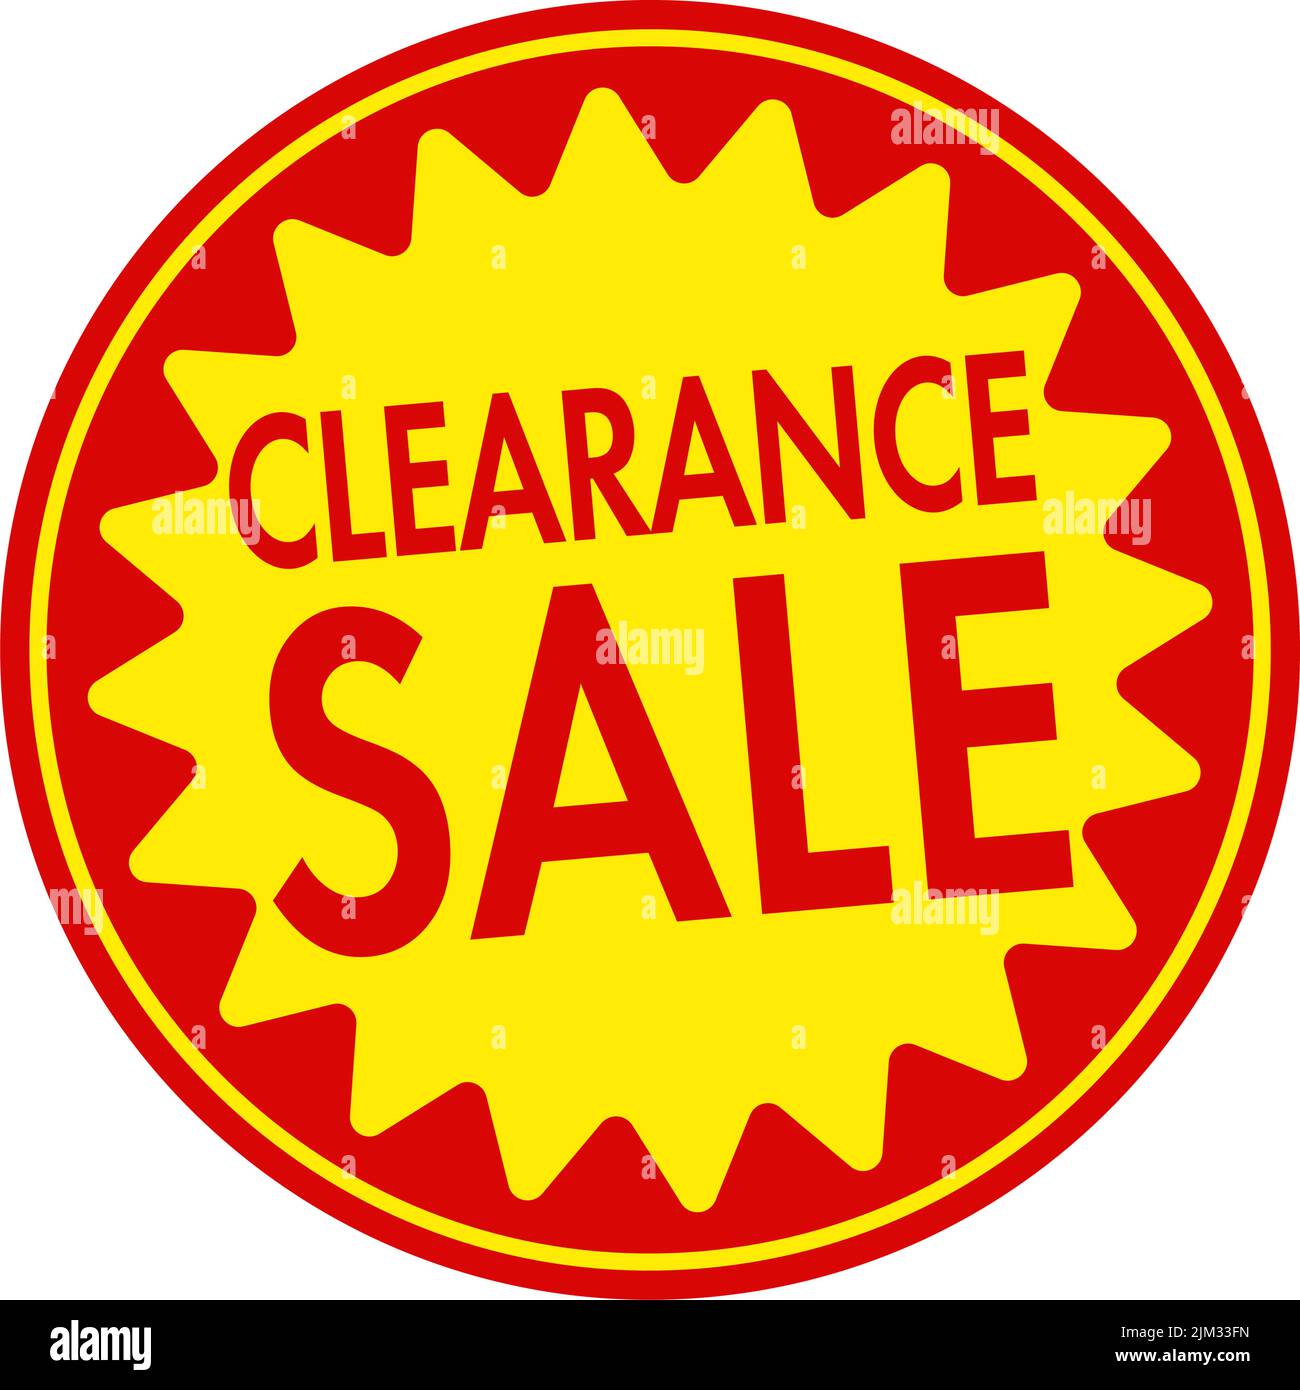 Sale label vector illustration | clearance sale Stock Vector